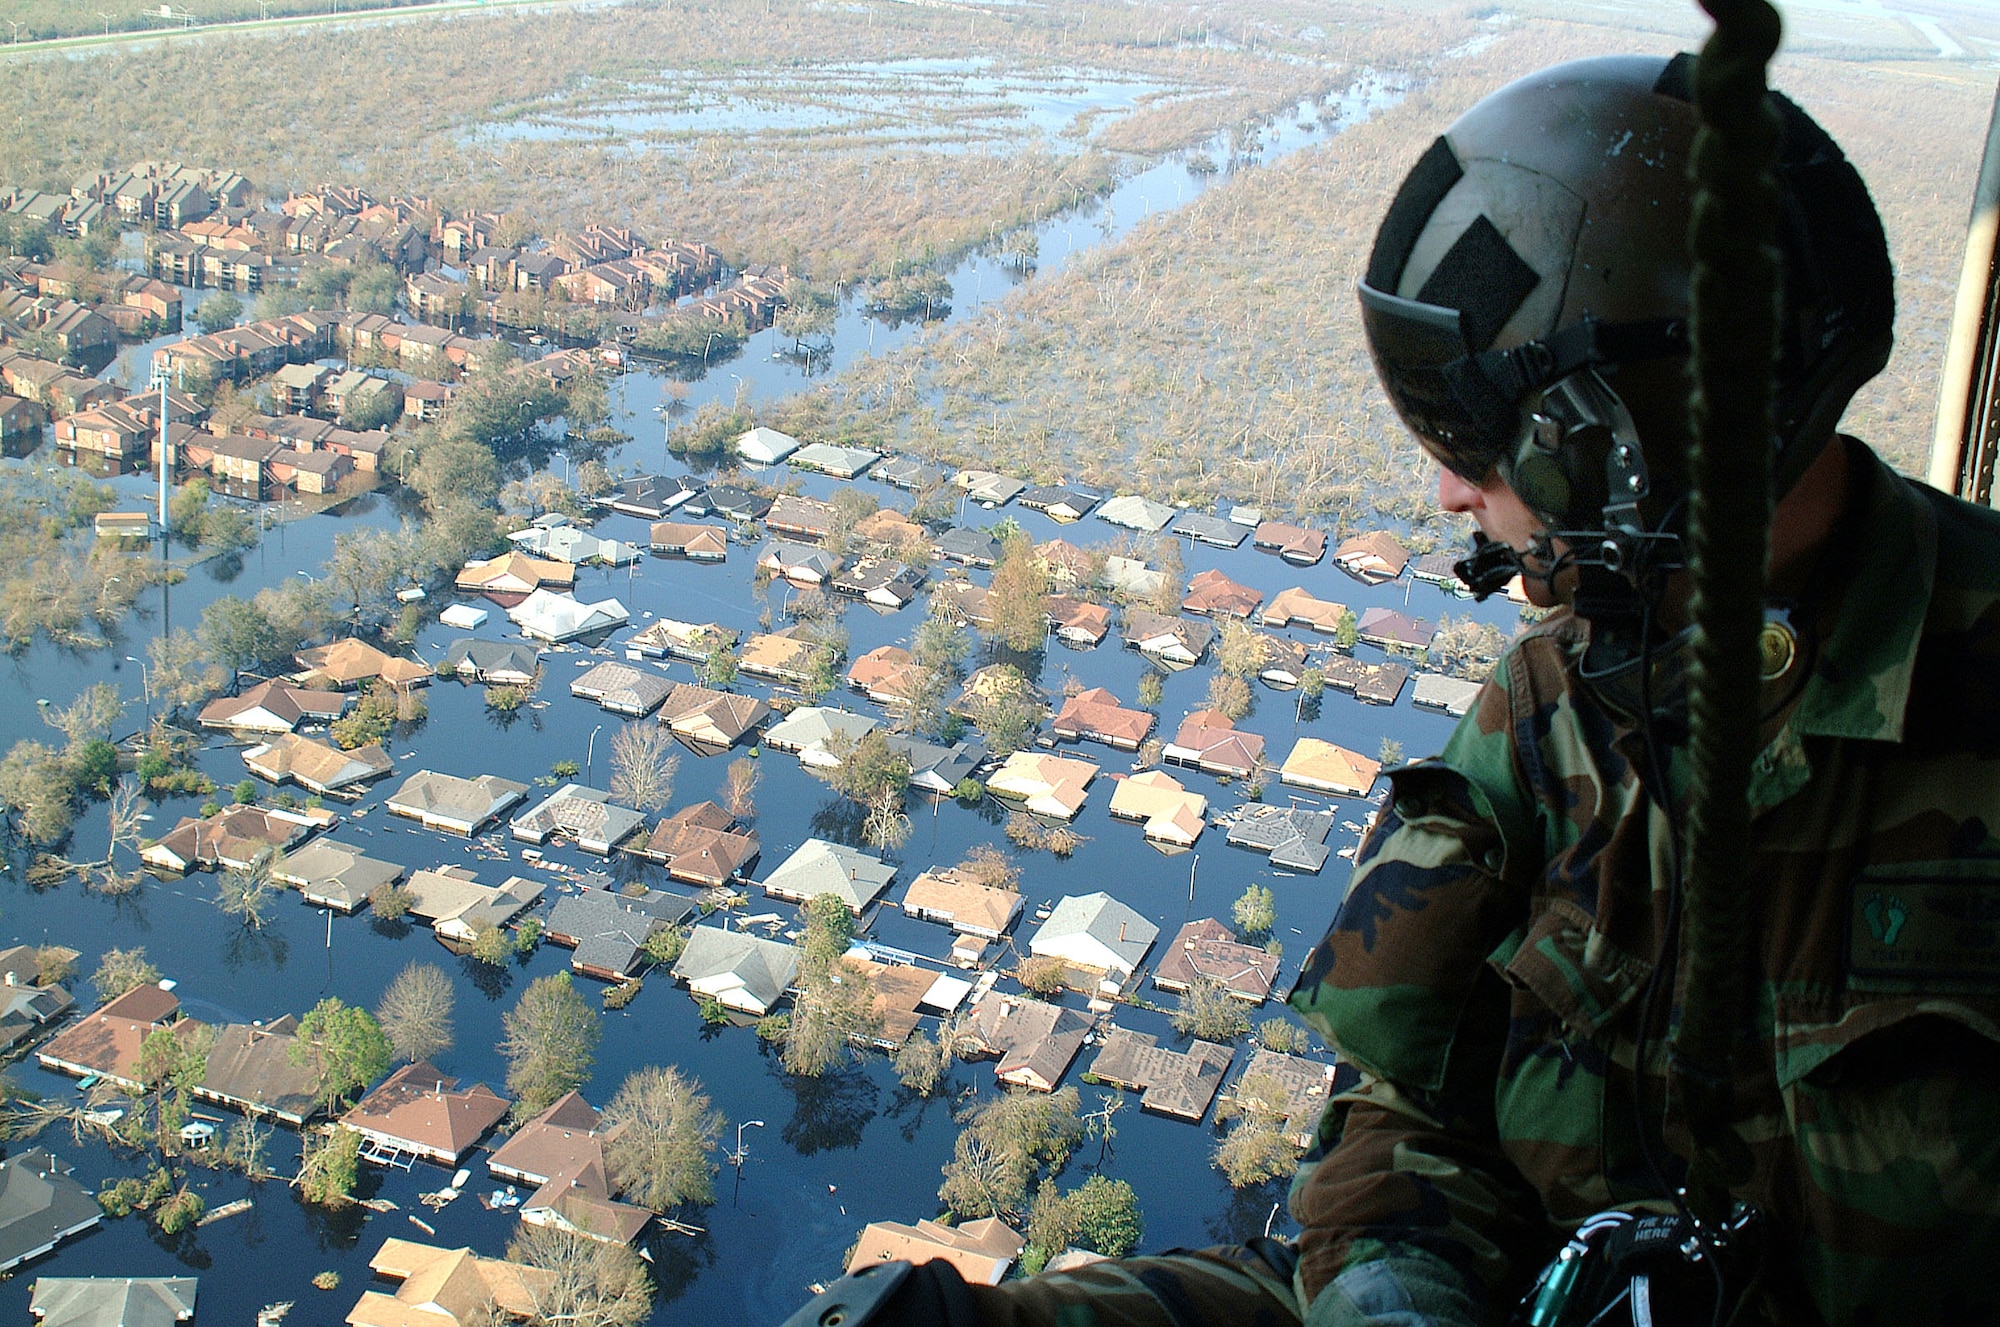 OVER NEW ORLEANS -- Tech. Sgt. Keith Berry looks down into flooded streets searching for survivors.  He is part of an Air Force Reserve team credited with saving more than 1,040 people in the aftermath of Hurricane Katrina.  He is a pararescueman with the 304th Rescue Squadron from Portland, Ore.  (U.S. Air Force photo by Master Sgt. Bill Huntington)